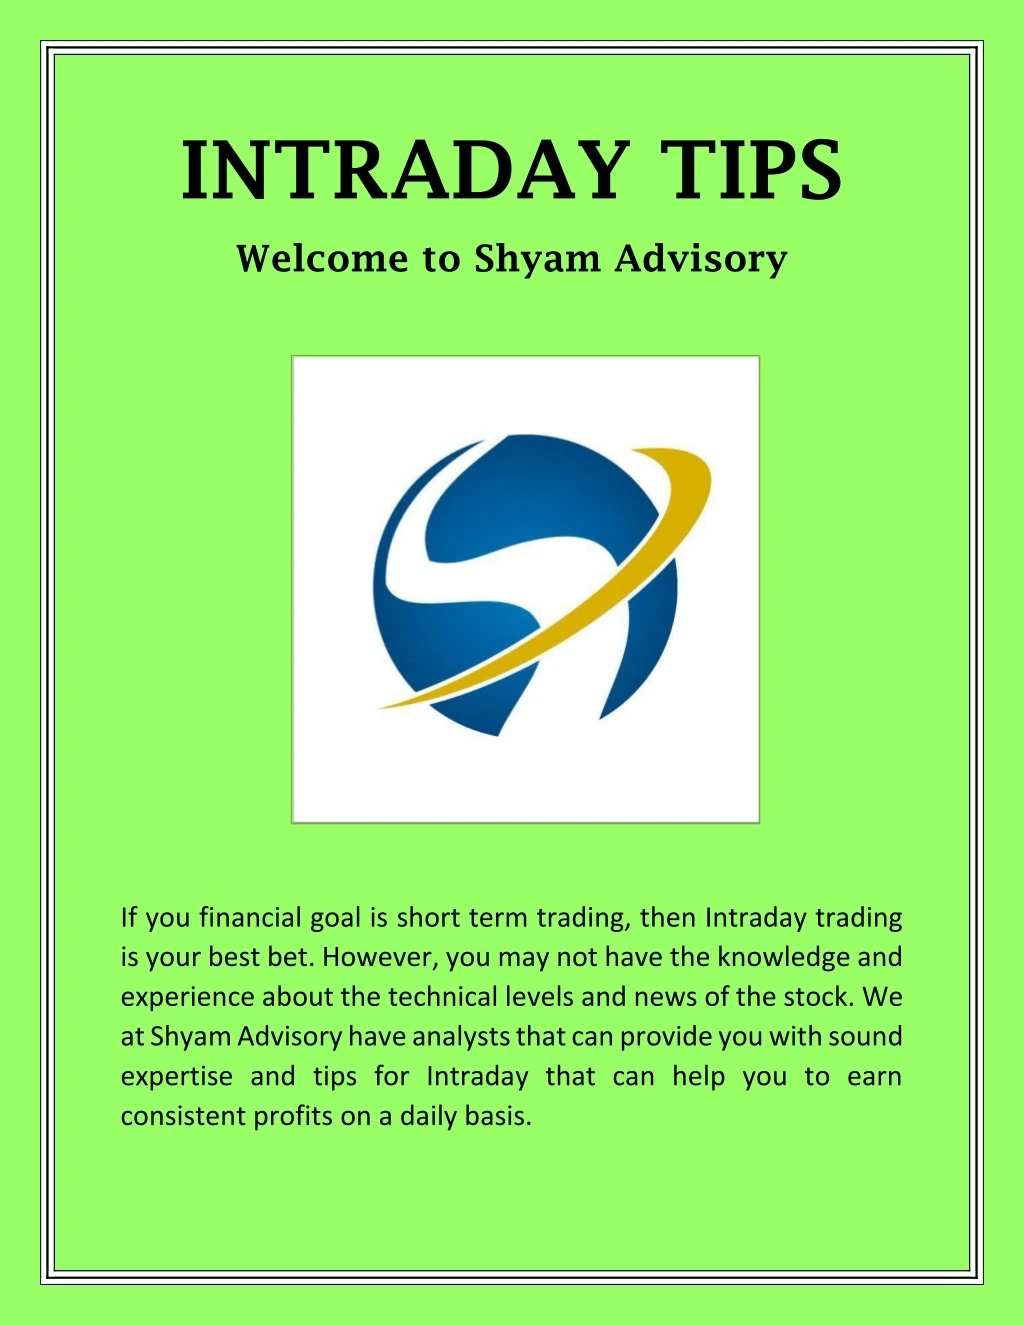 intraday tips